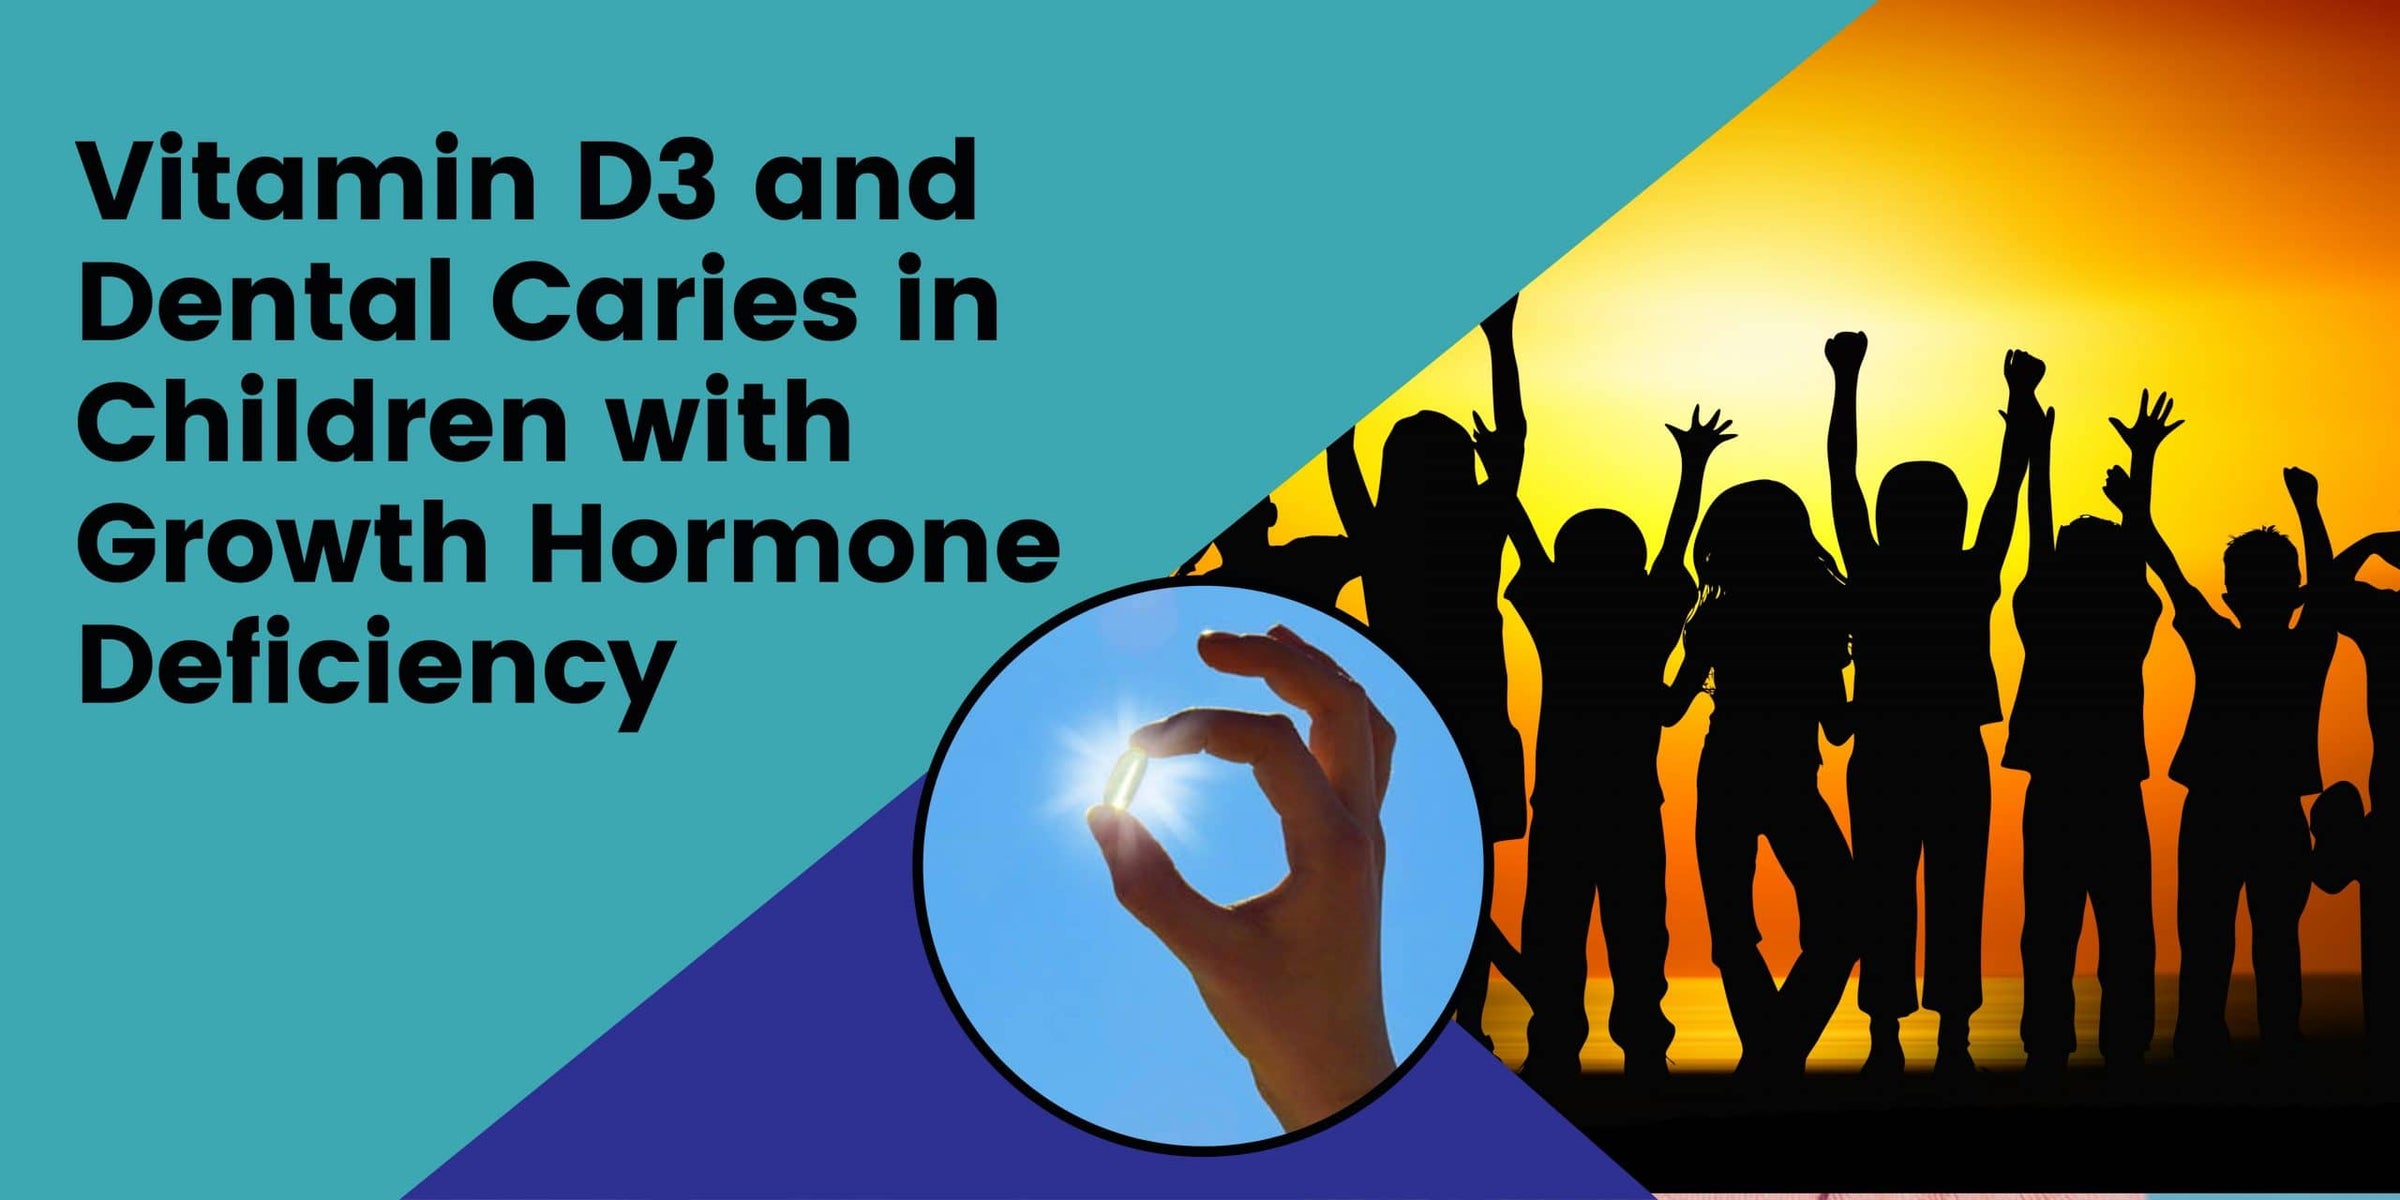 Vitamin D3 and Dental Caries in Children with Growth Hormone Deficiency Image